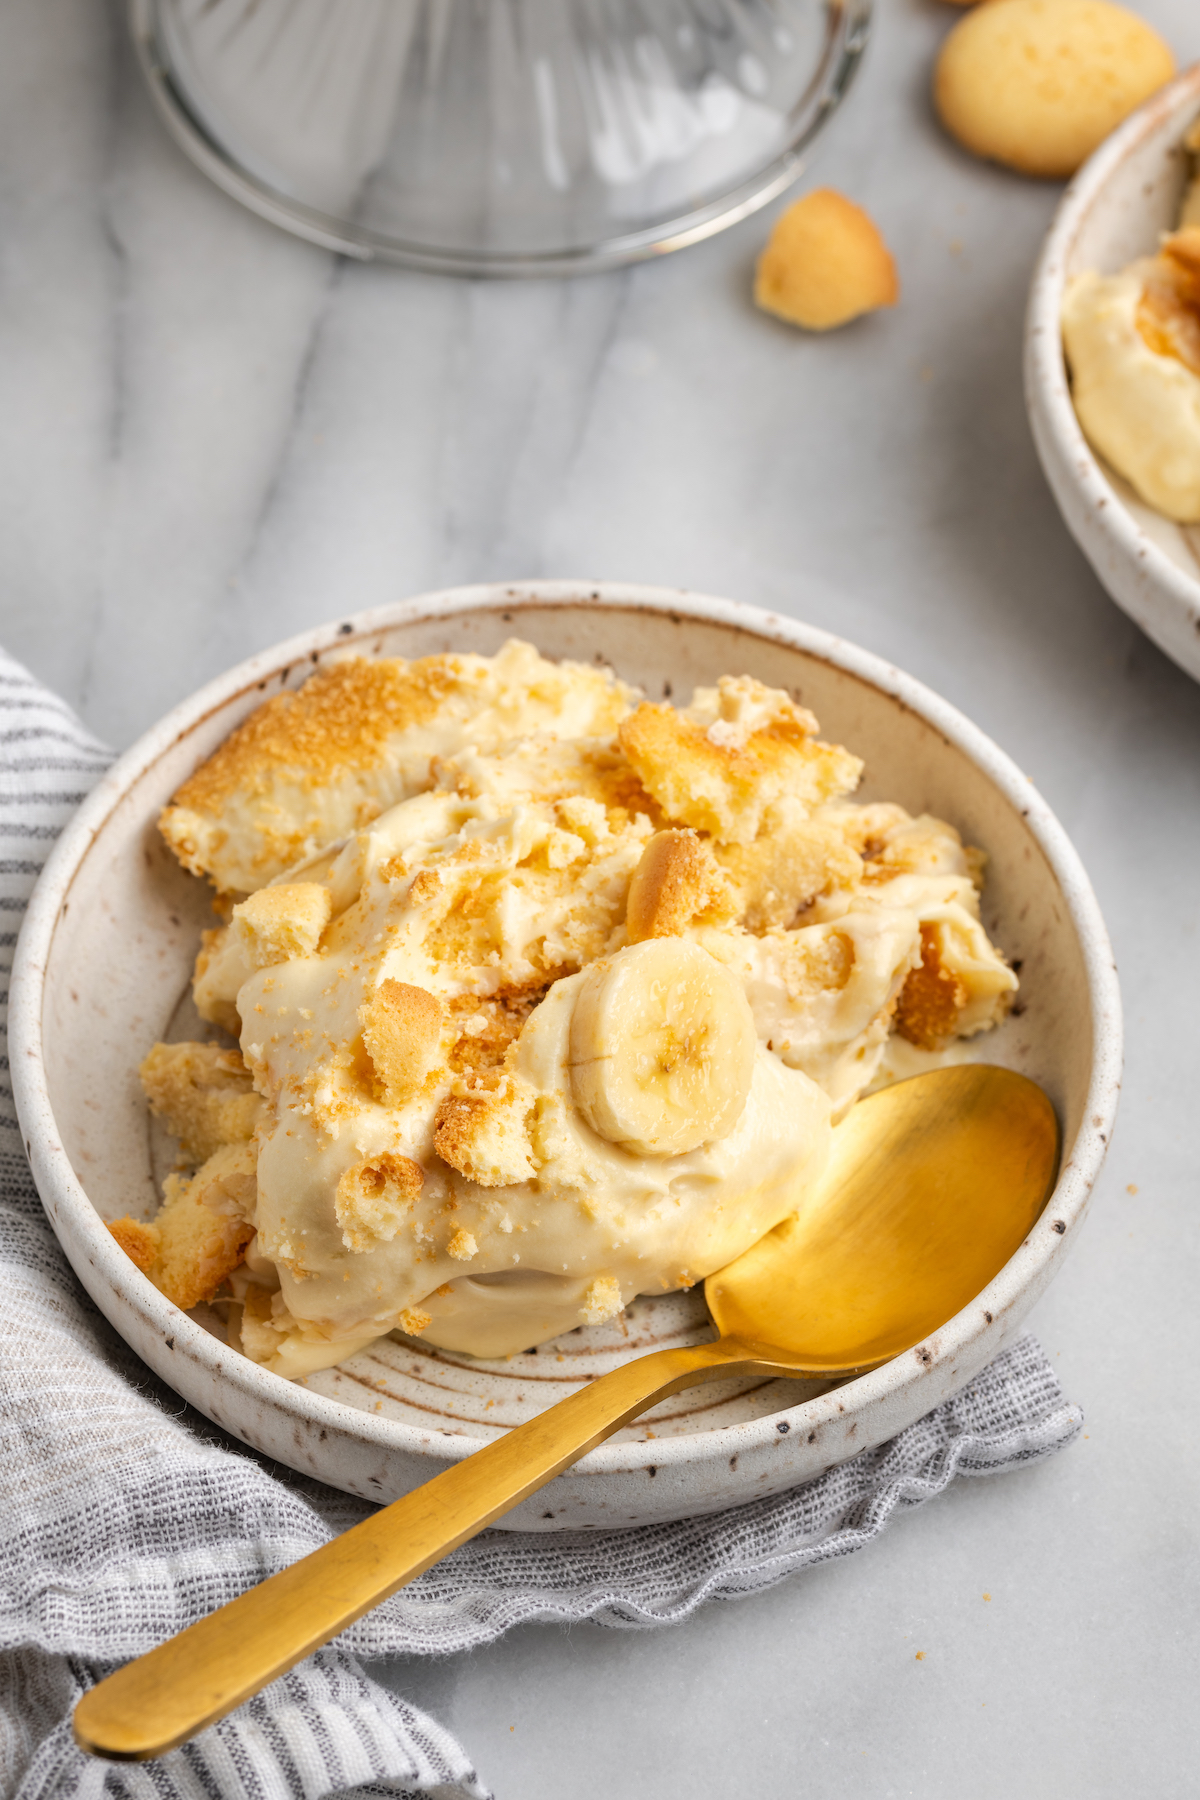 Creamy vegan banana pudding in bowl with spoon